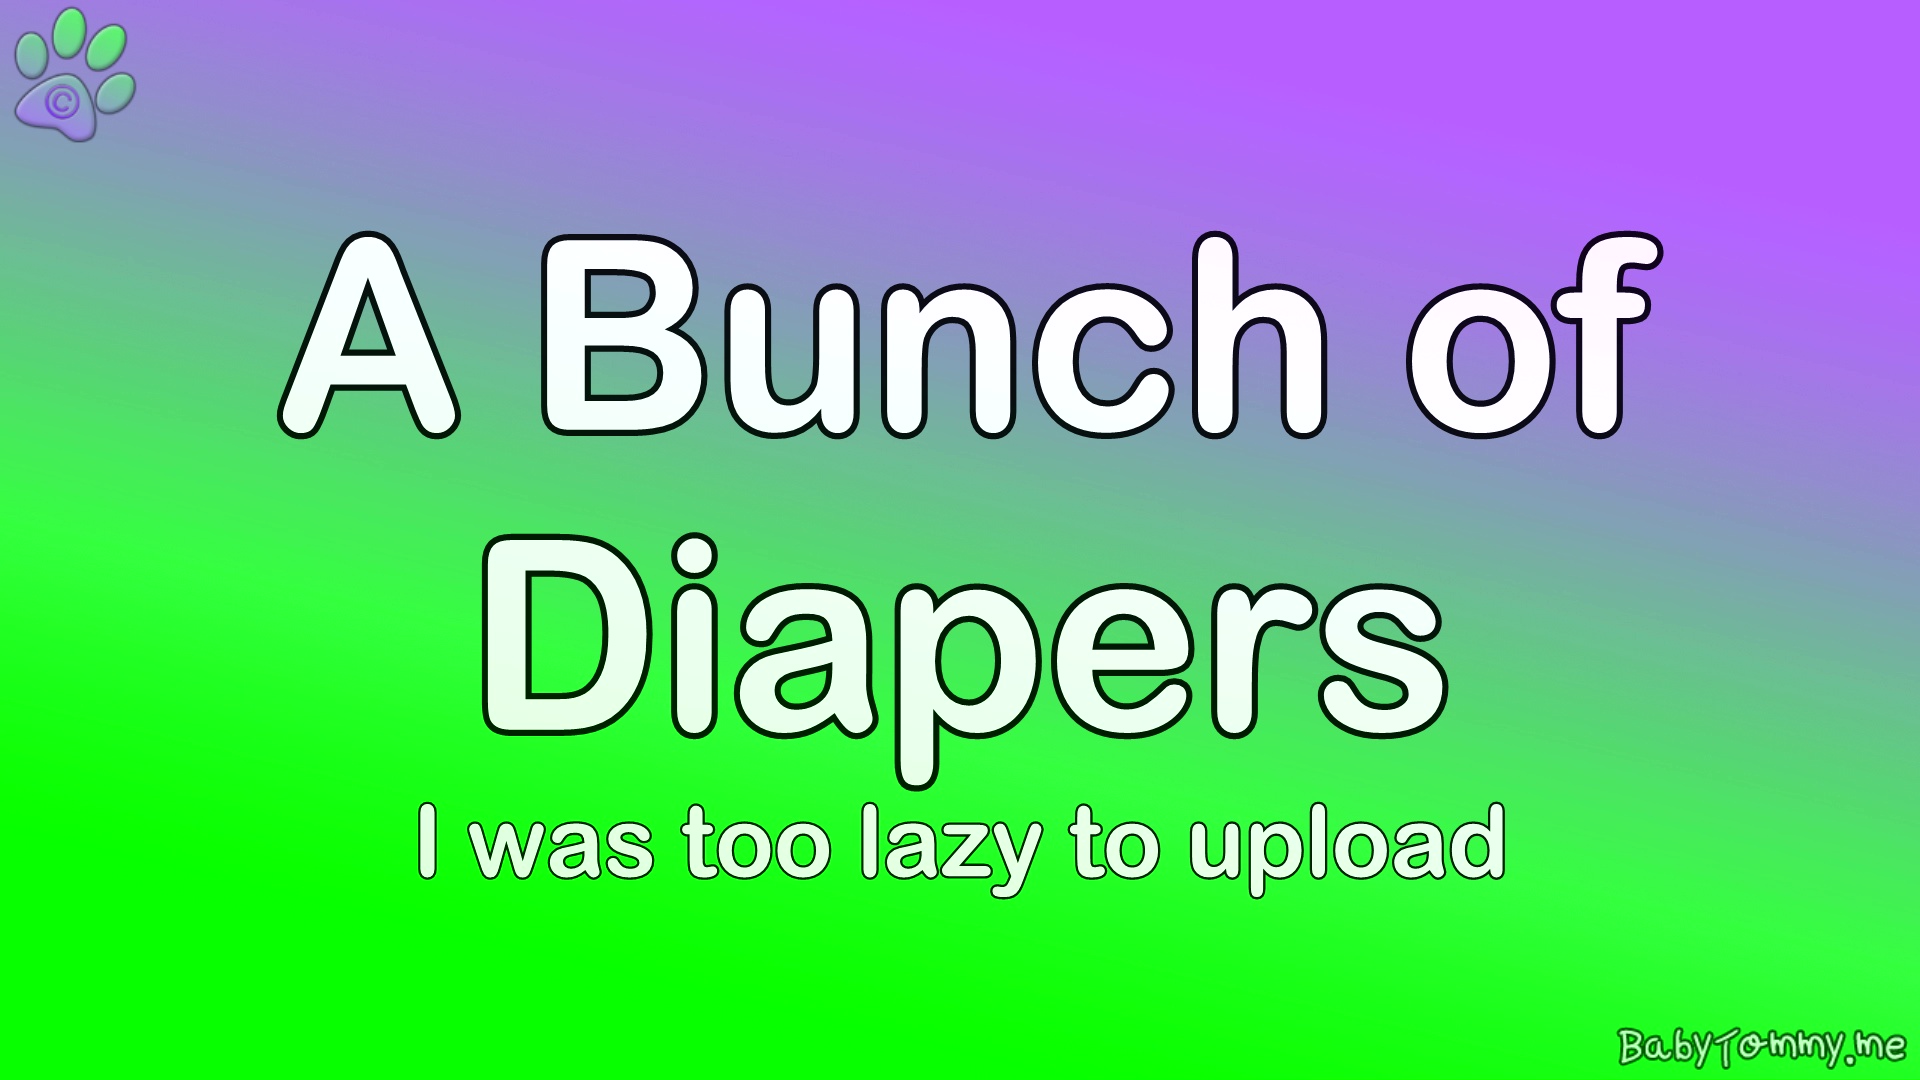 A Bunch of Diapers (That I was too lazy to edit before)